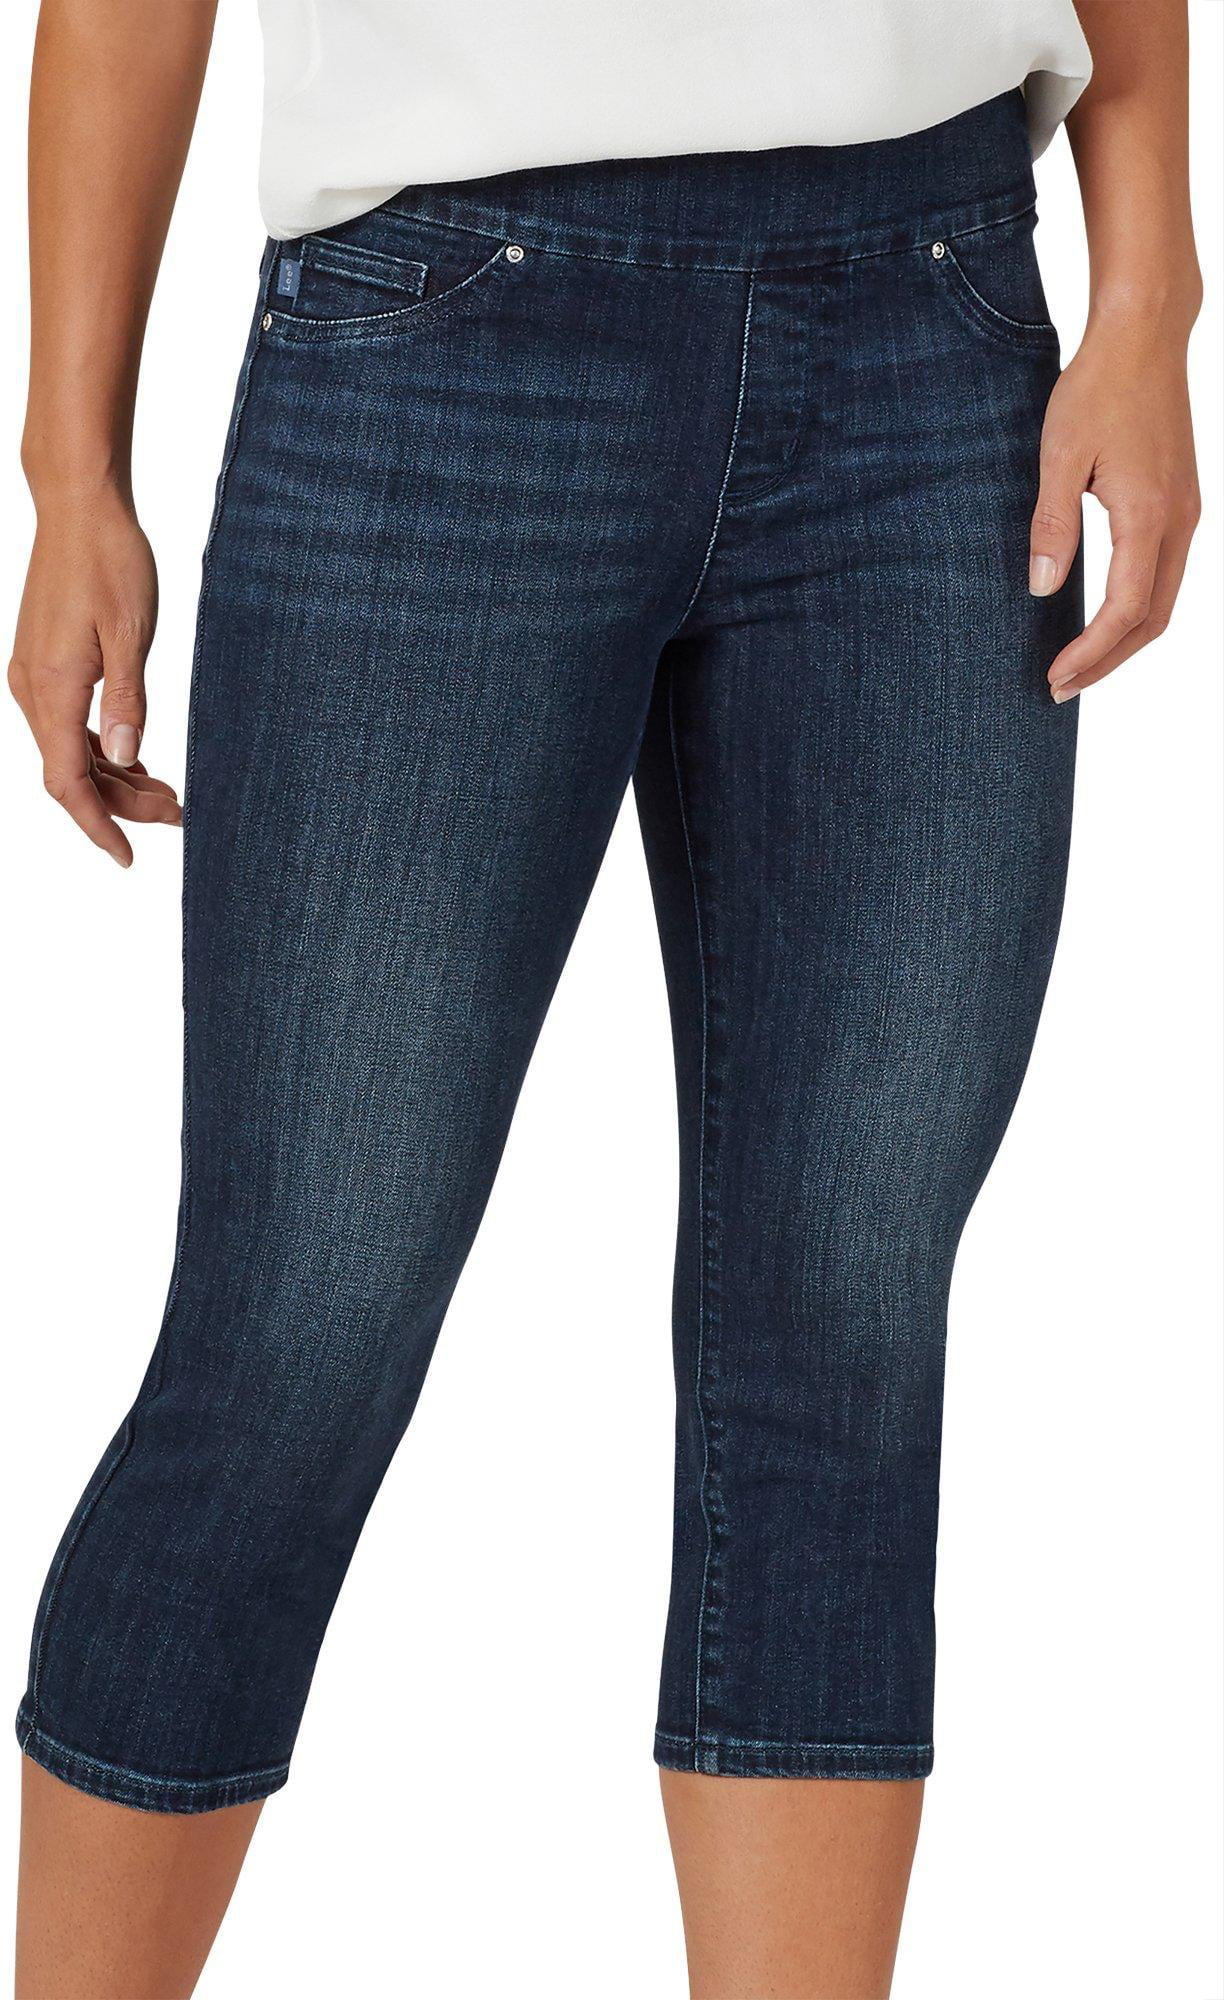 Woman Within Plus Med 14-16  Wide Leg Capris in stretch knit  Royal MSRP $25.